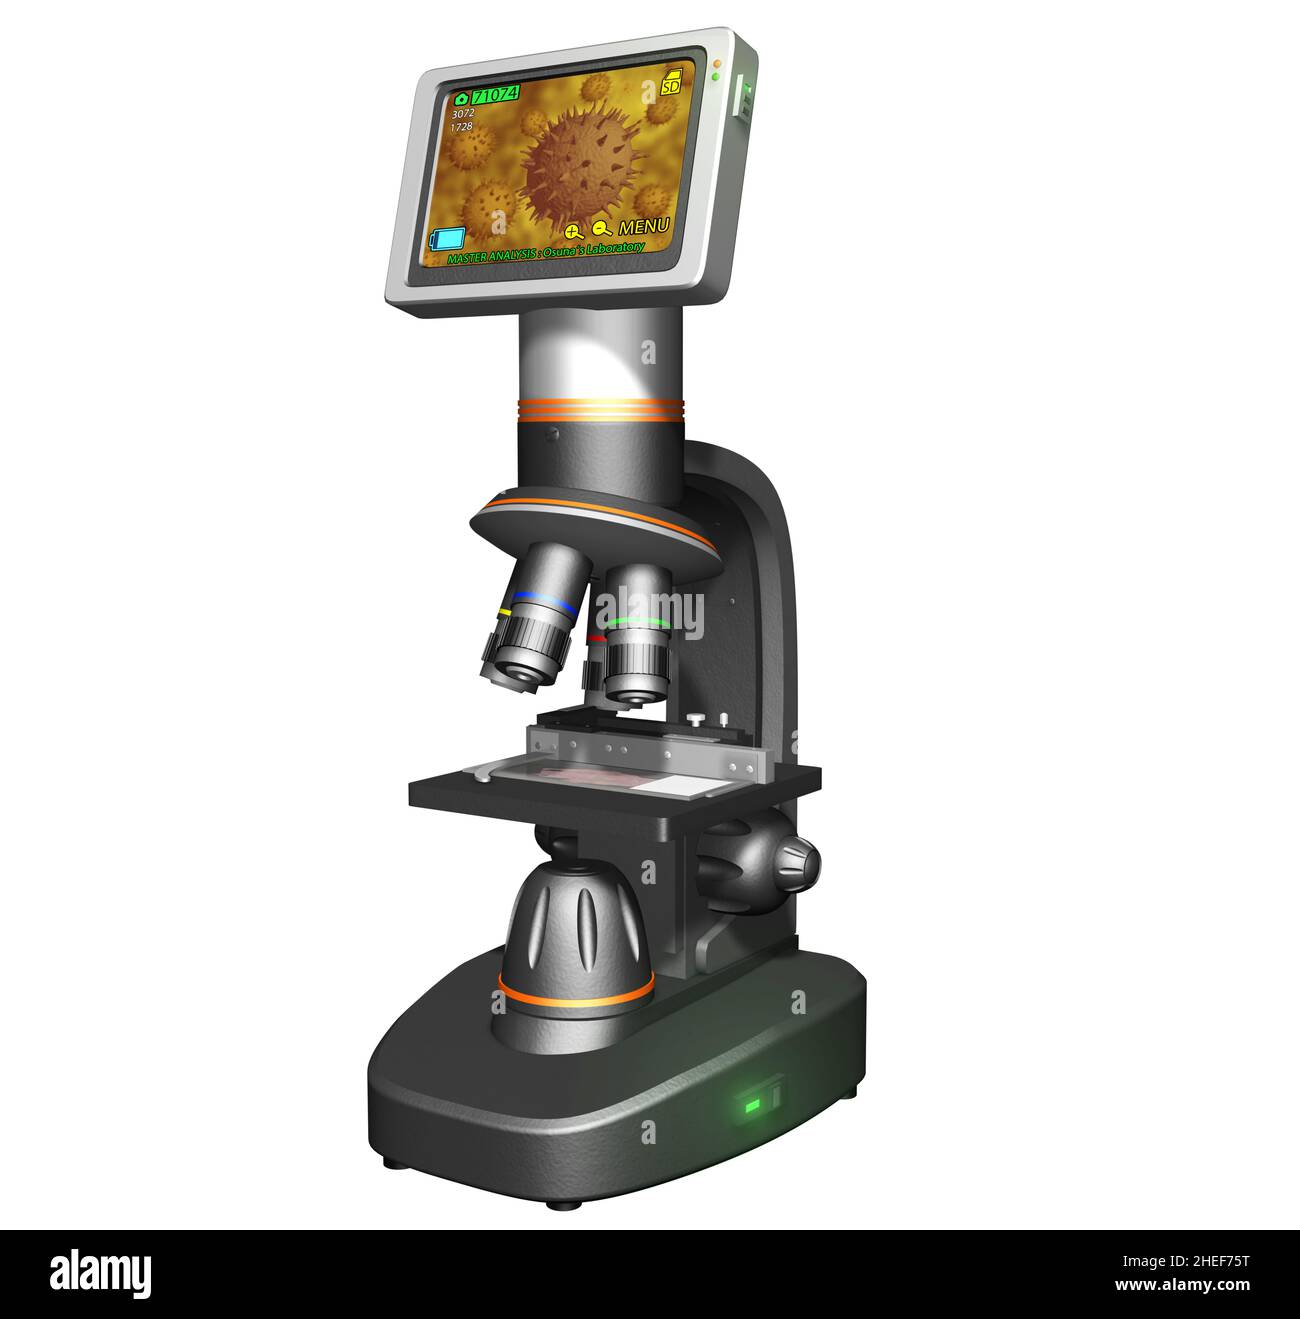 3D Rendering Illustration of a High Resolution Digital Microscope with Screen. Stock Photo